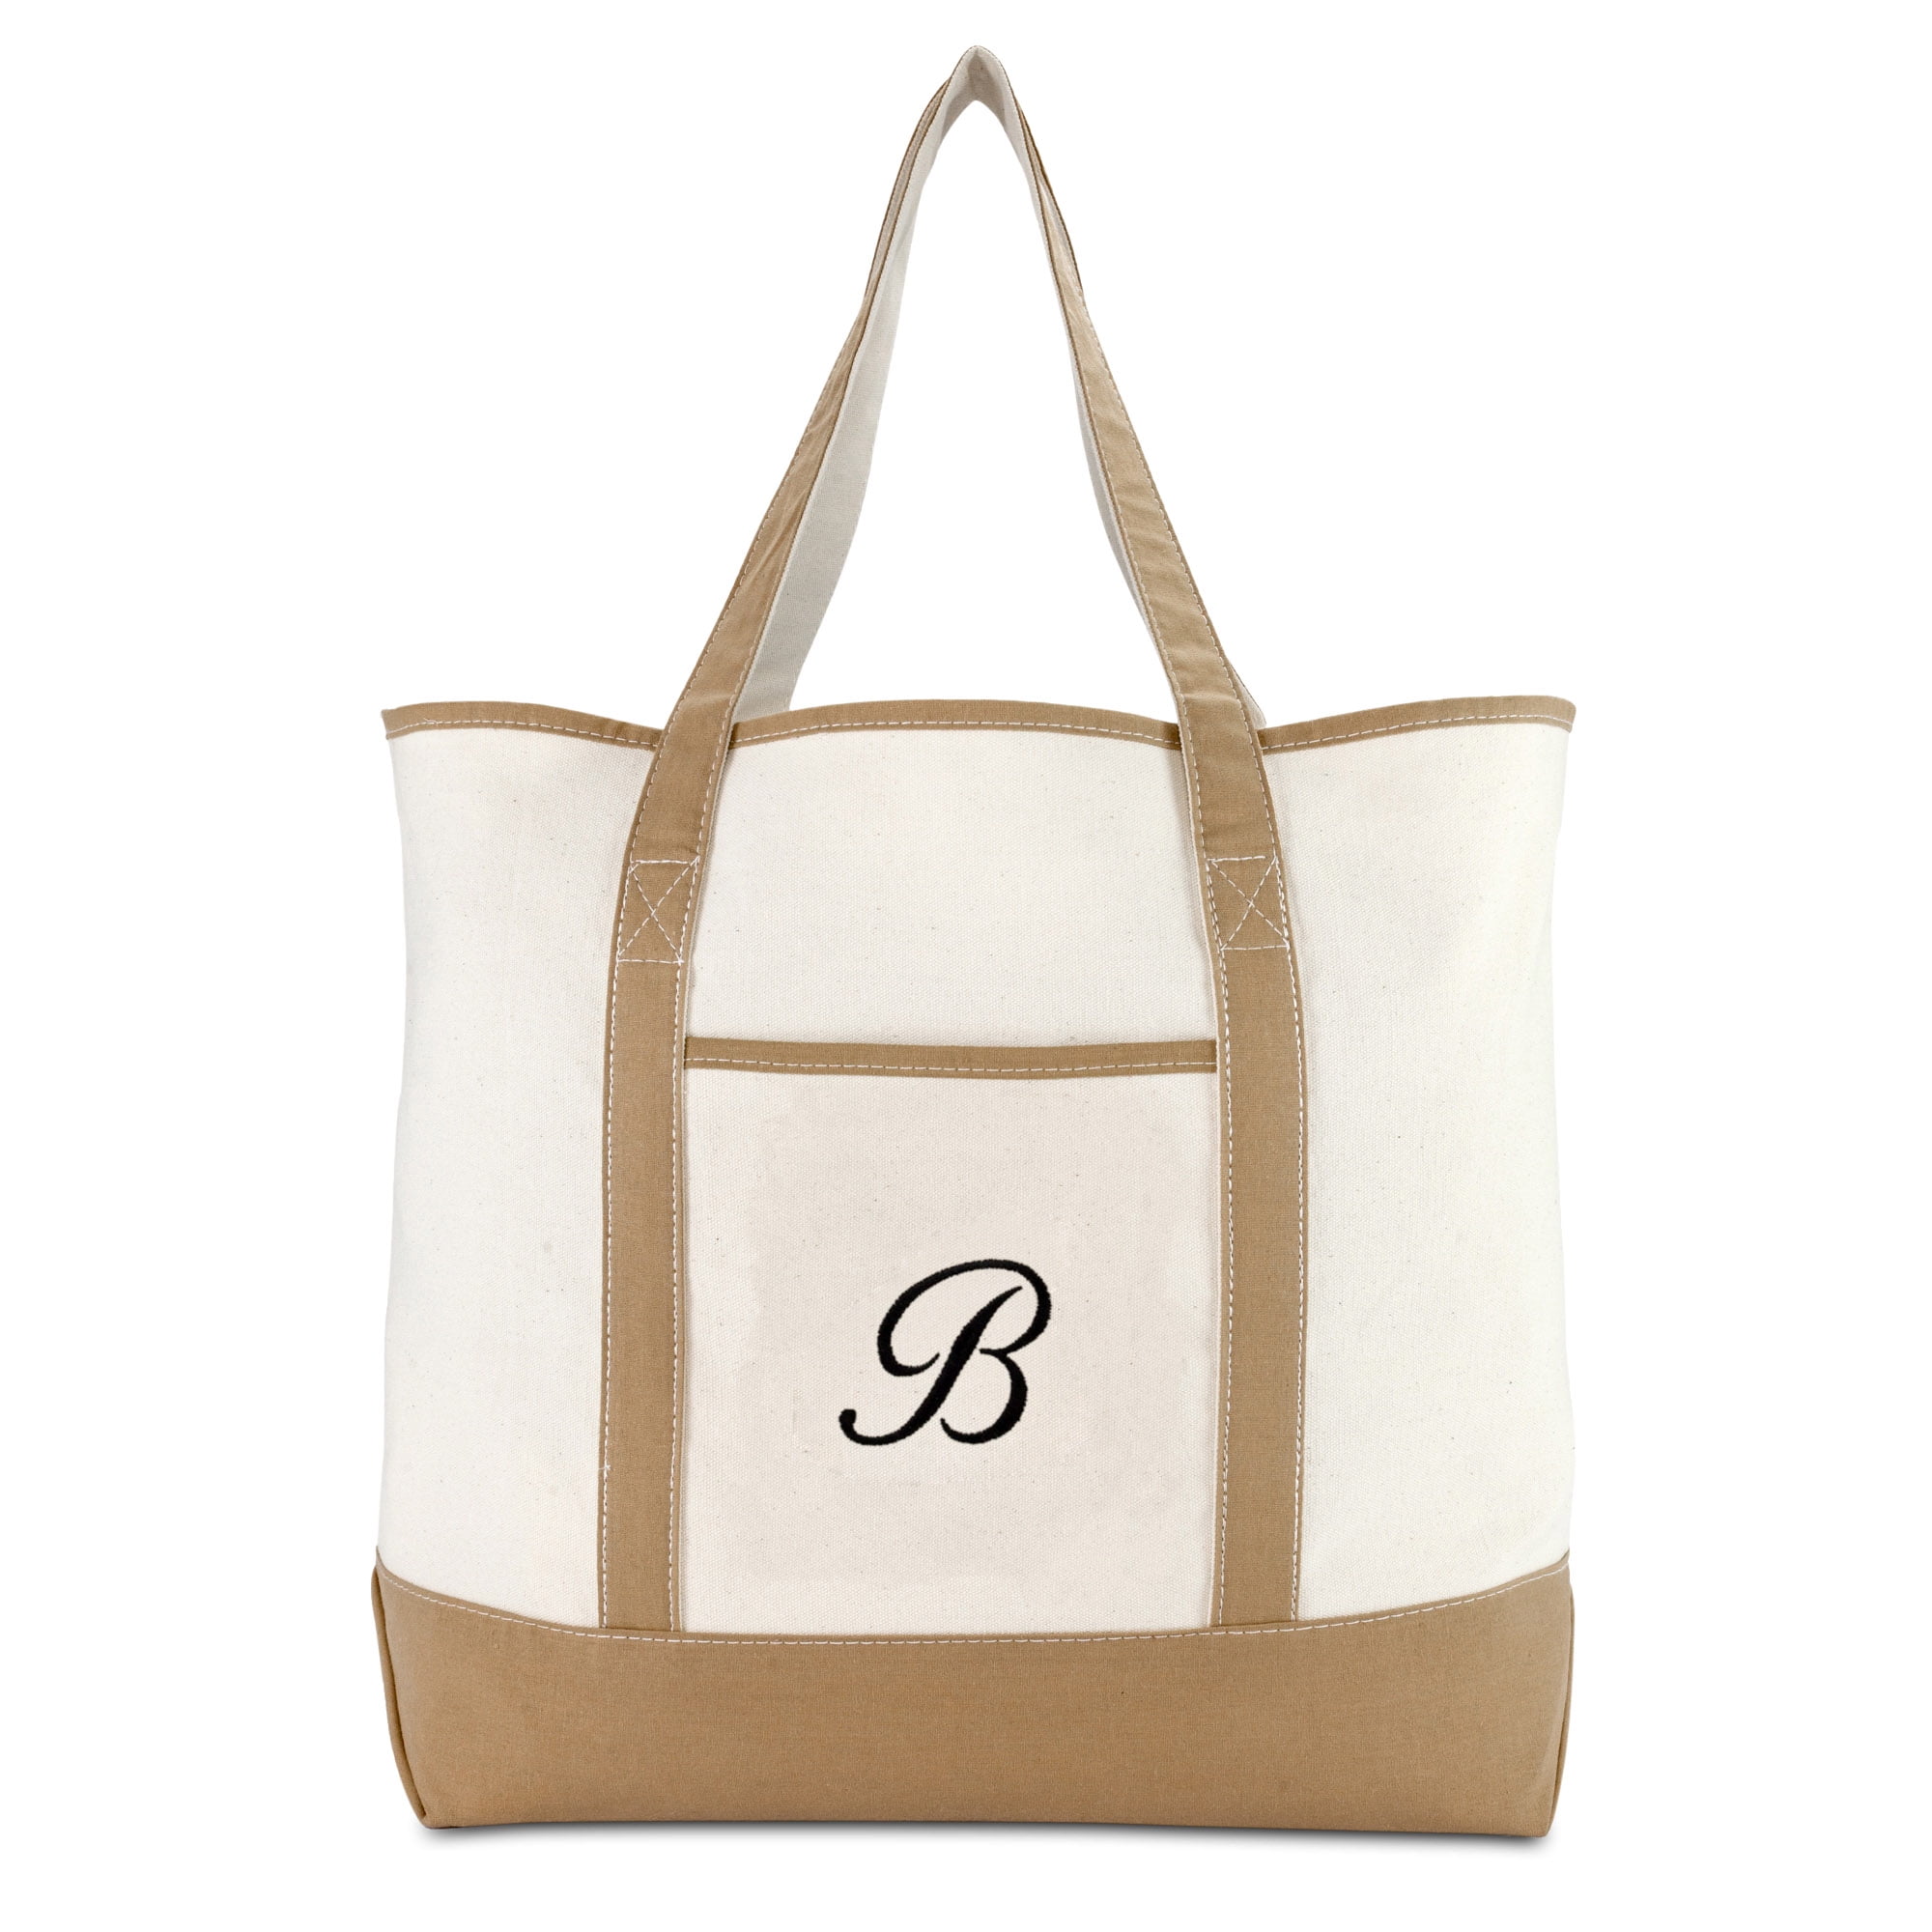 Dalix Medium Personalized Tote Bag Monogrammed Initial Letter - P Gray